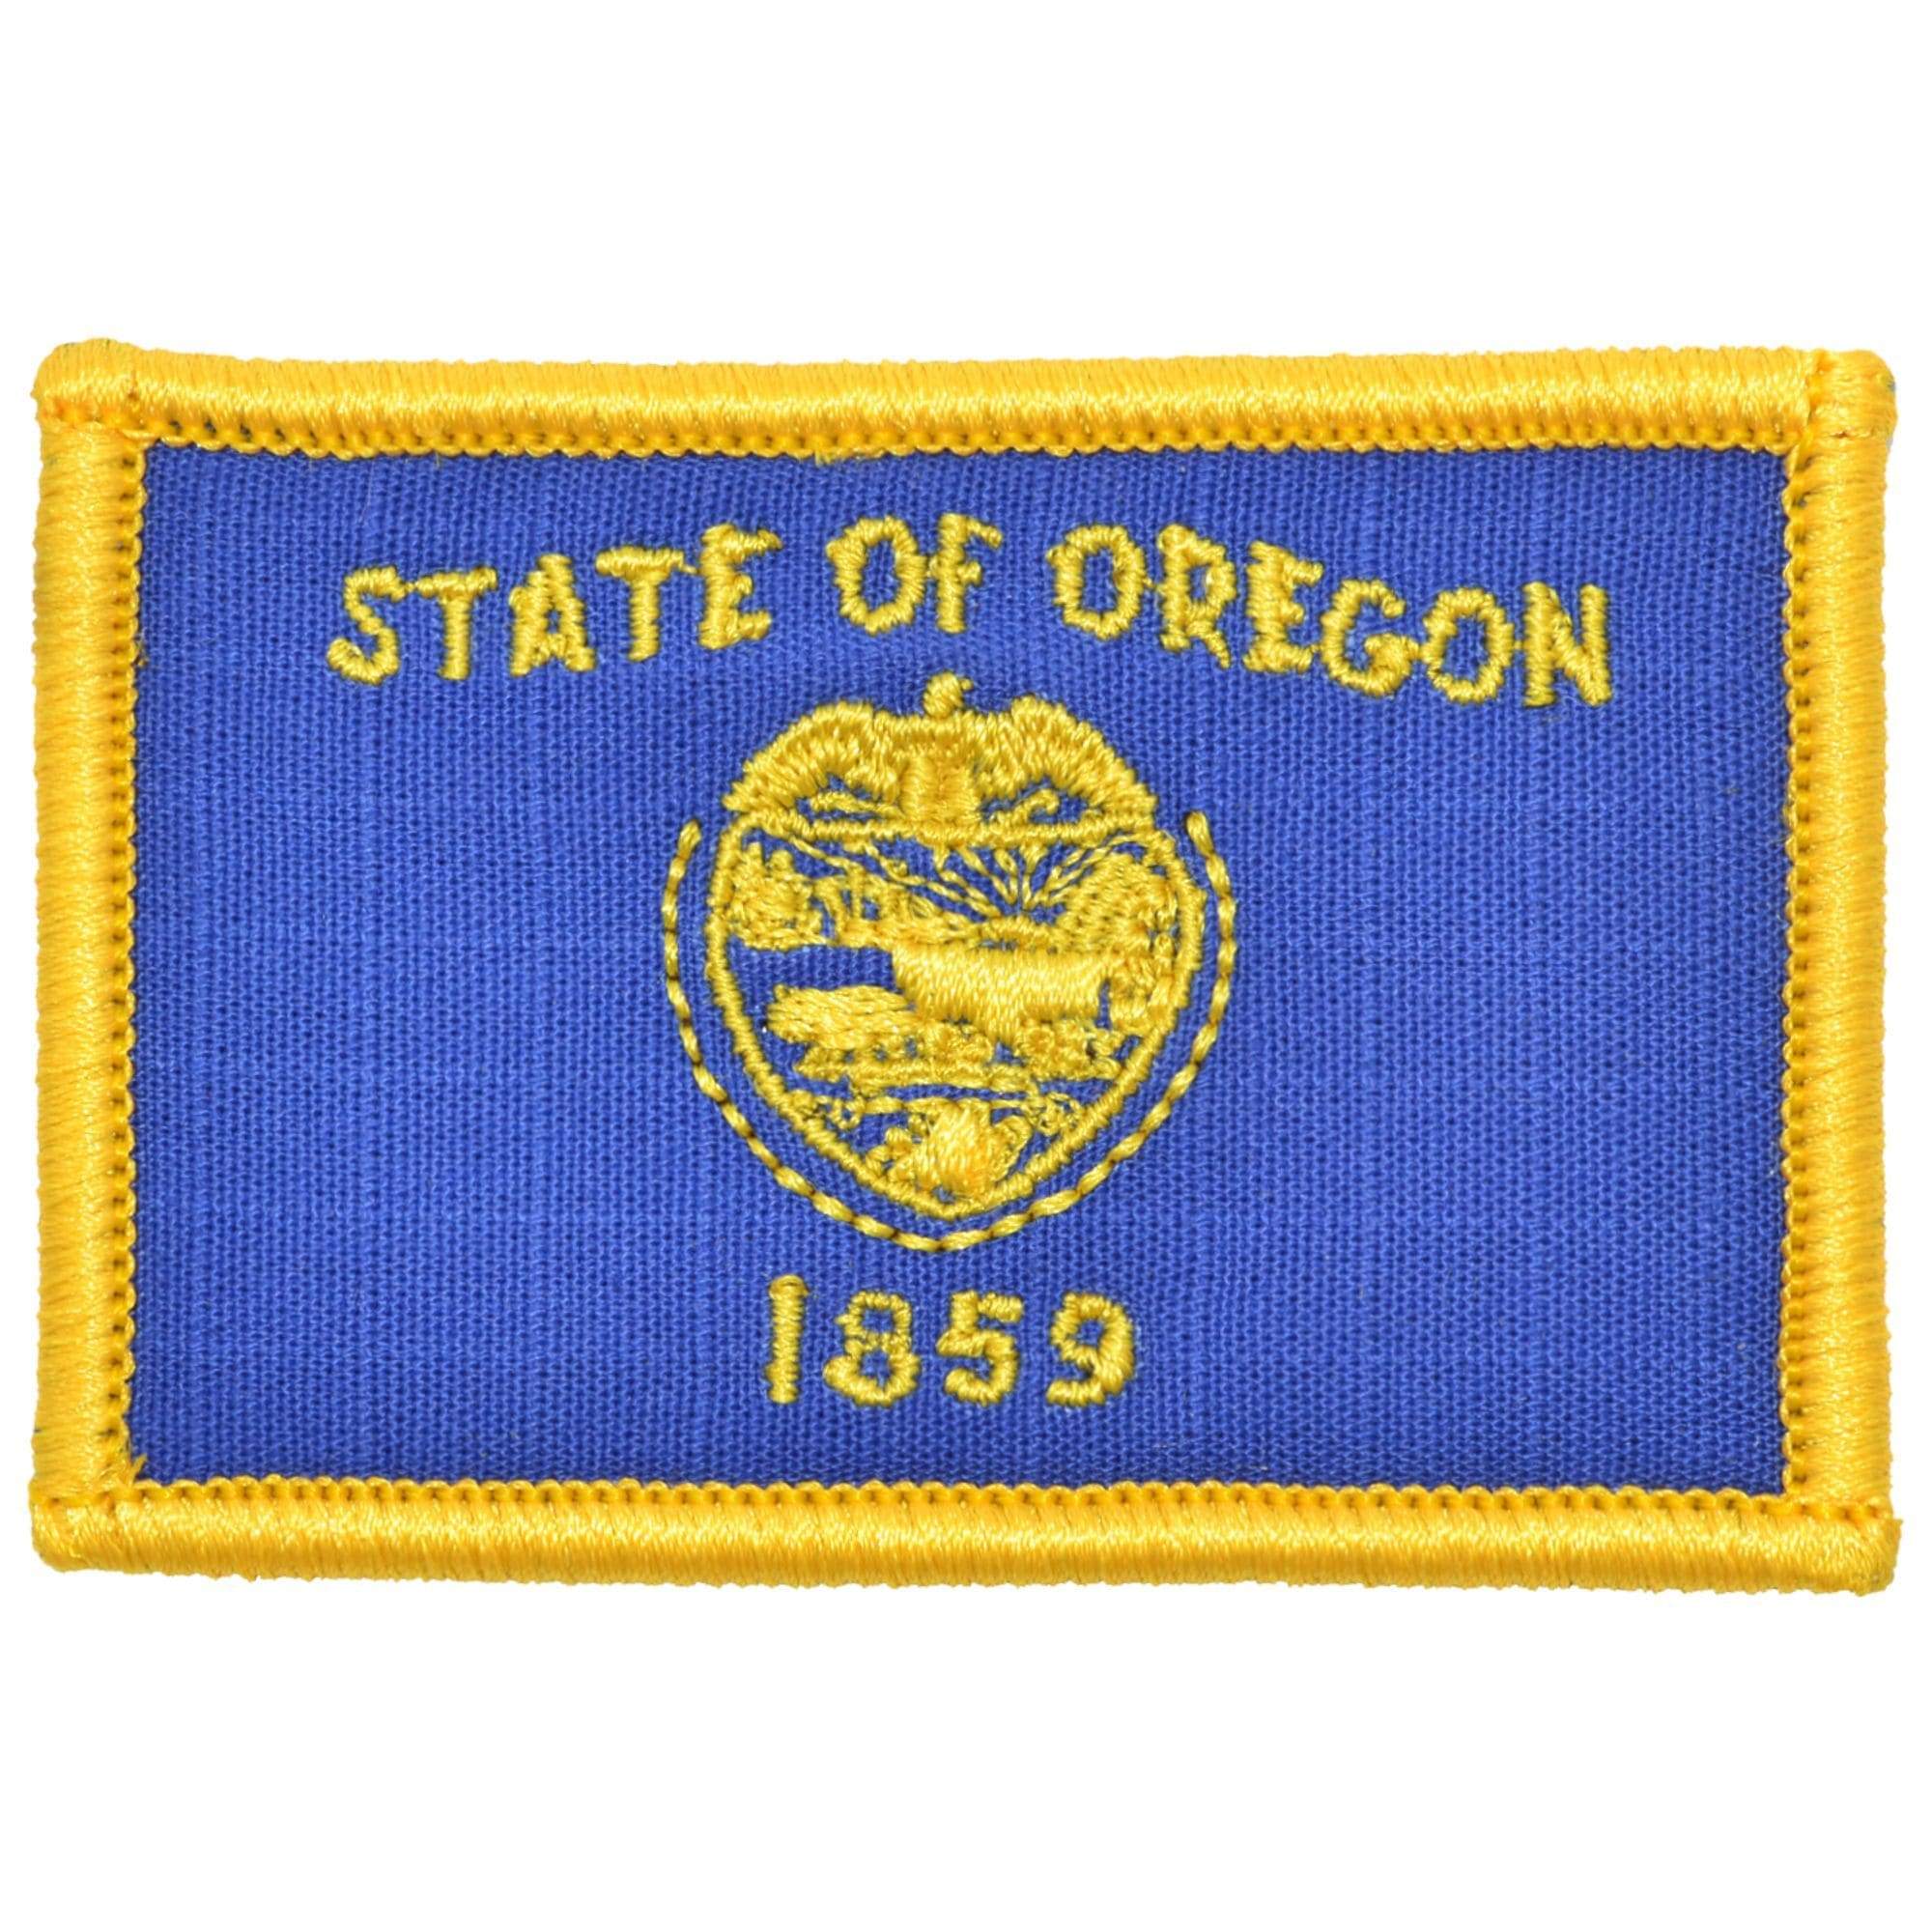 Tactical Gear Junkie Patches Full Color Oregon State Flag - 2x3 Patch